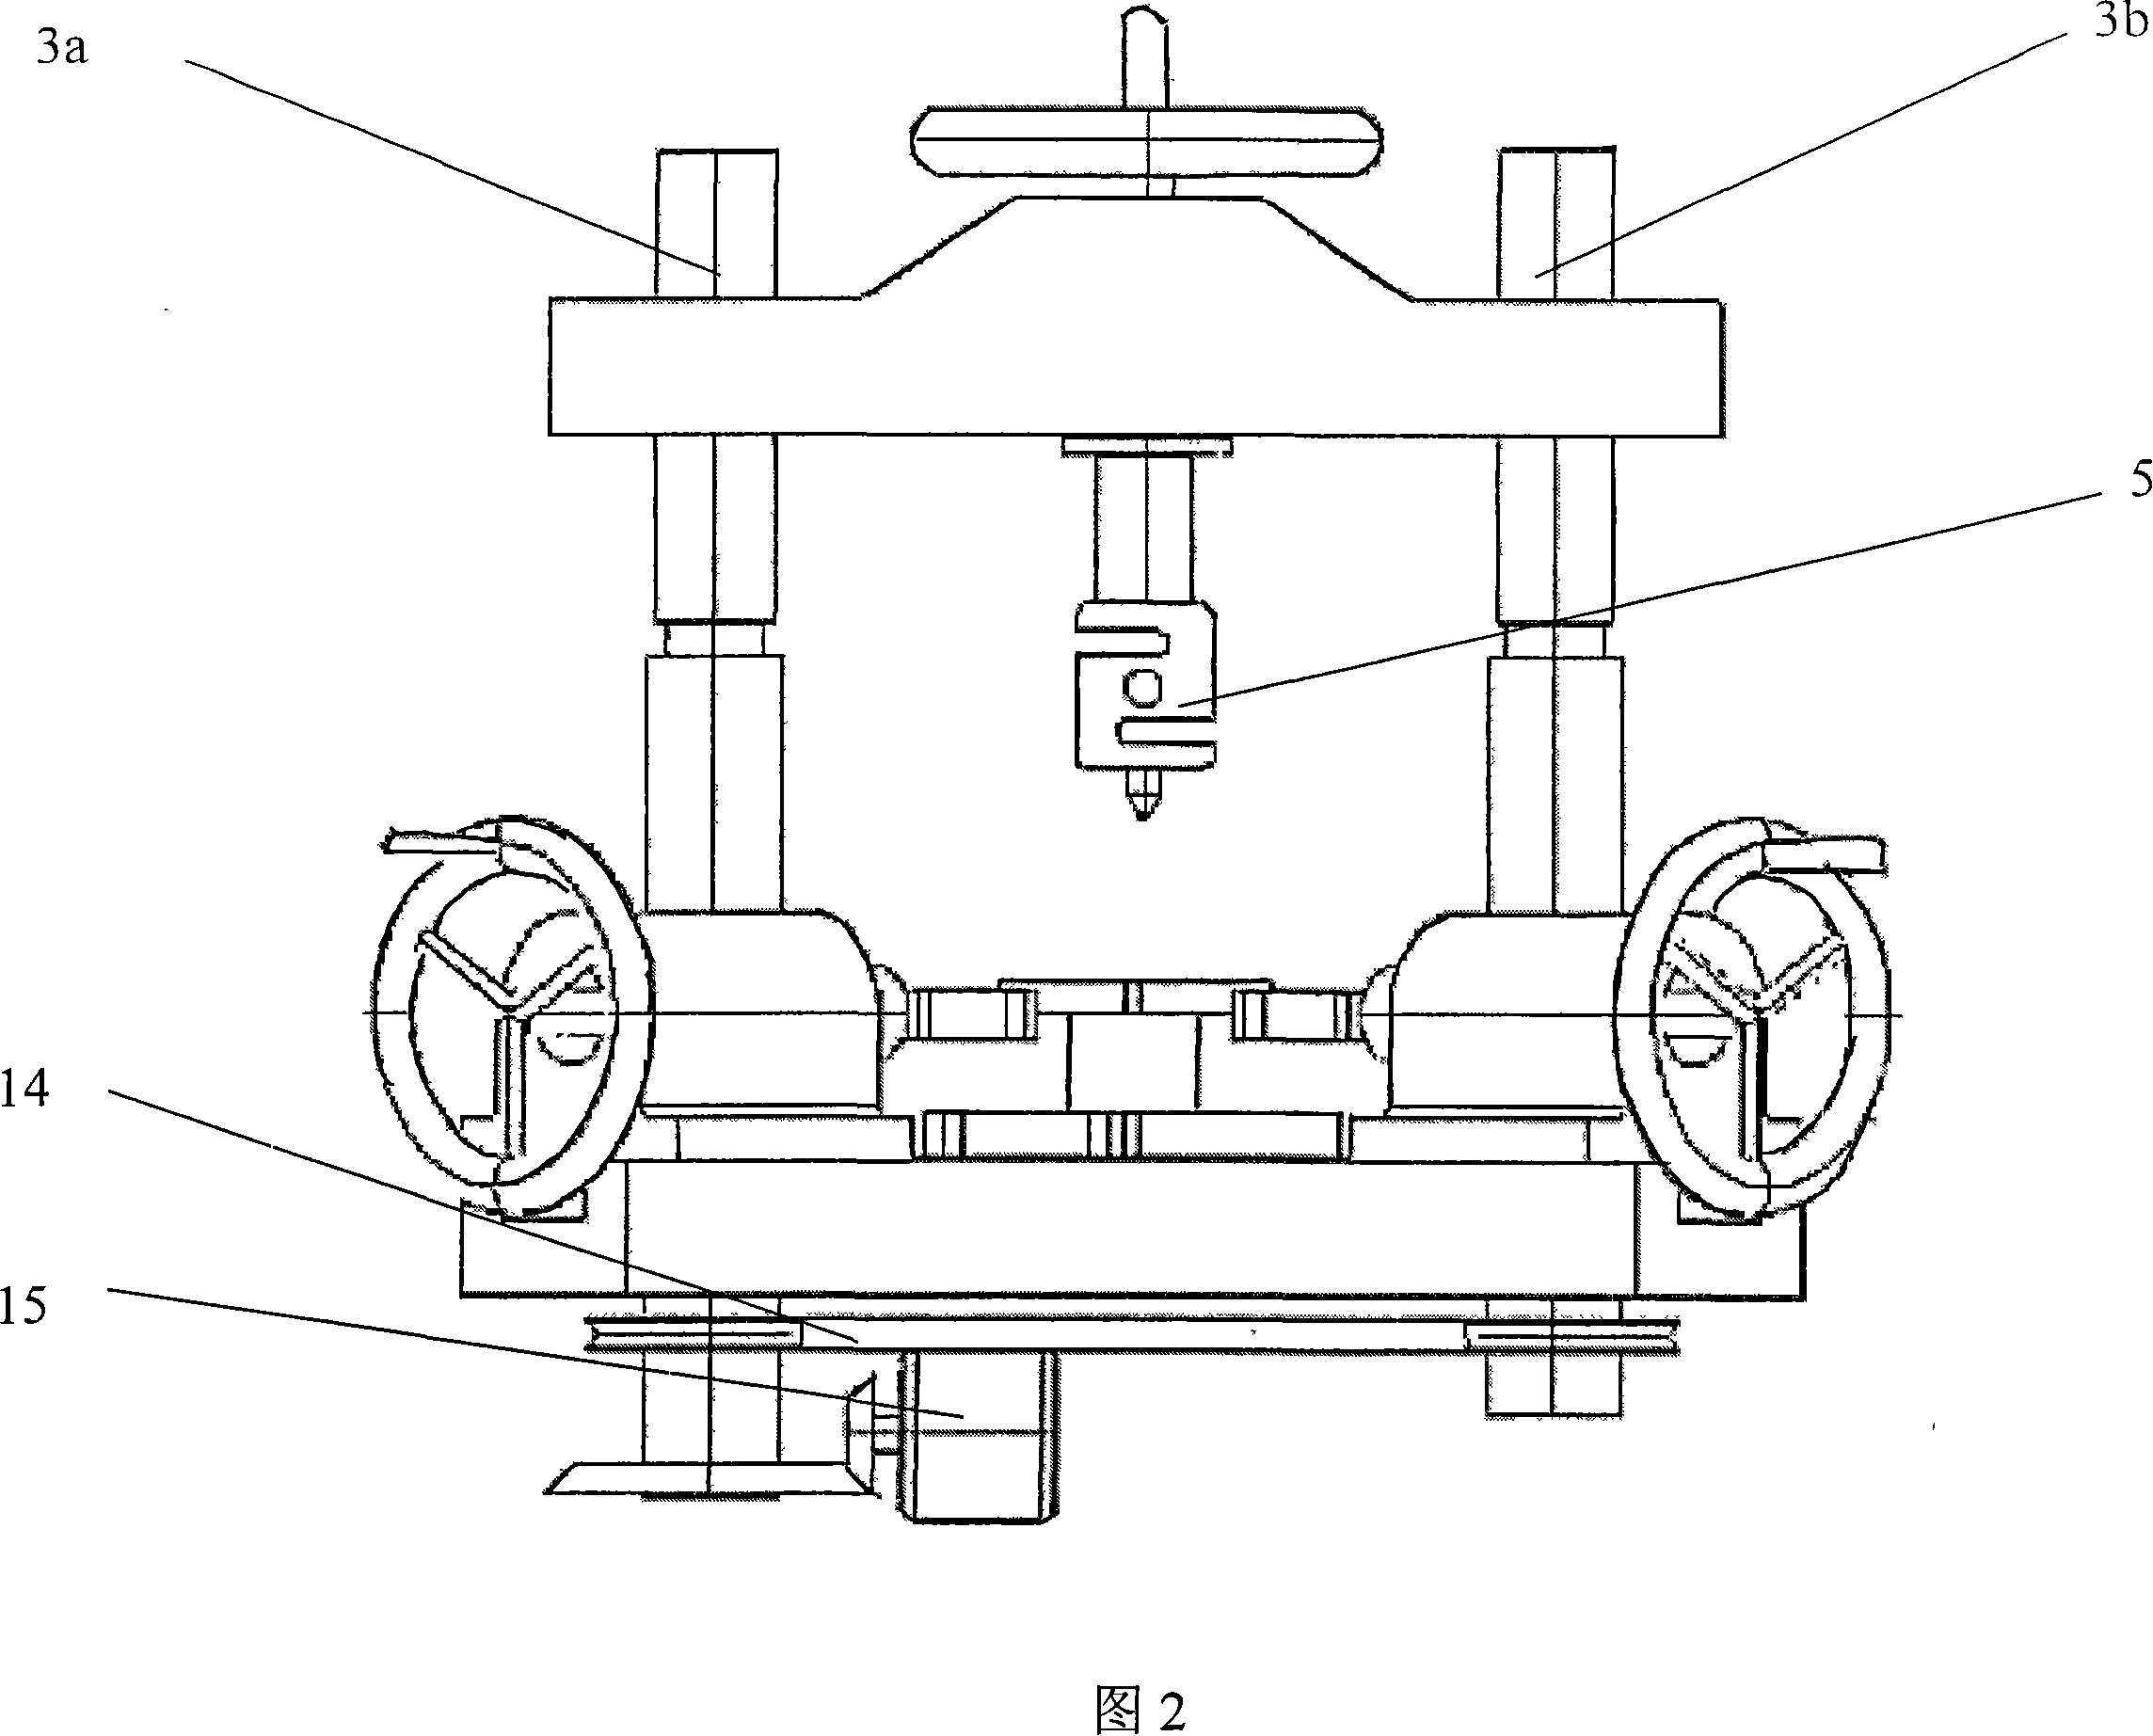 Three-dimensional force transducer calibration device